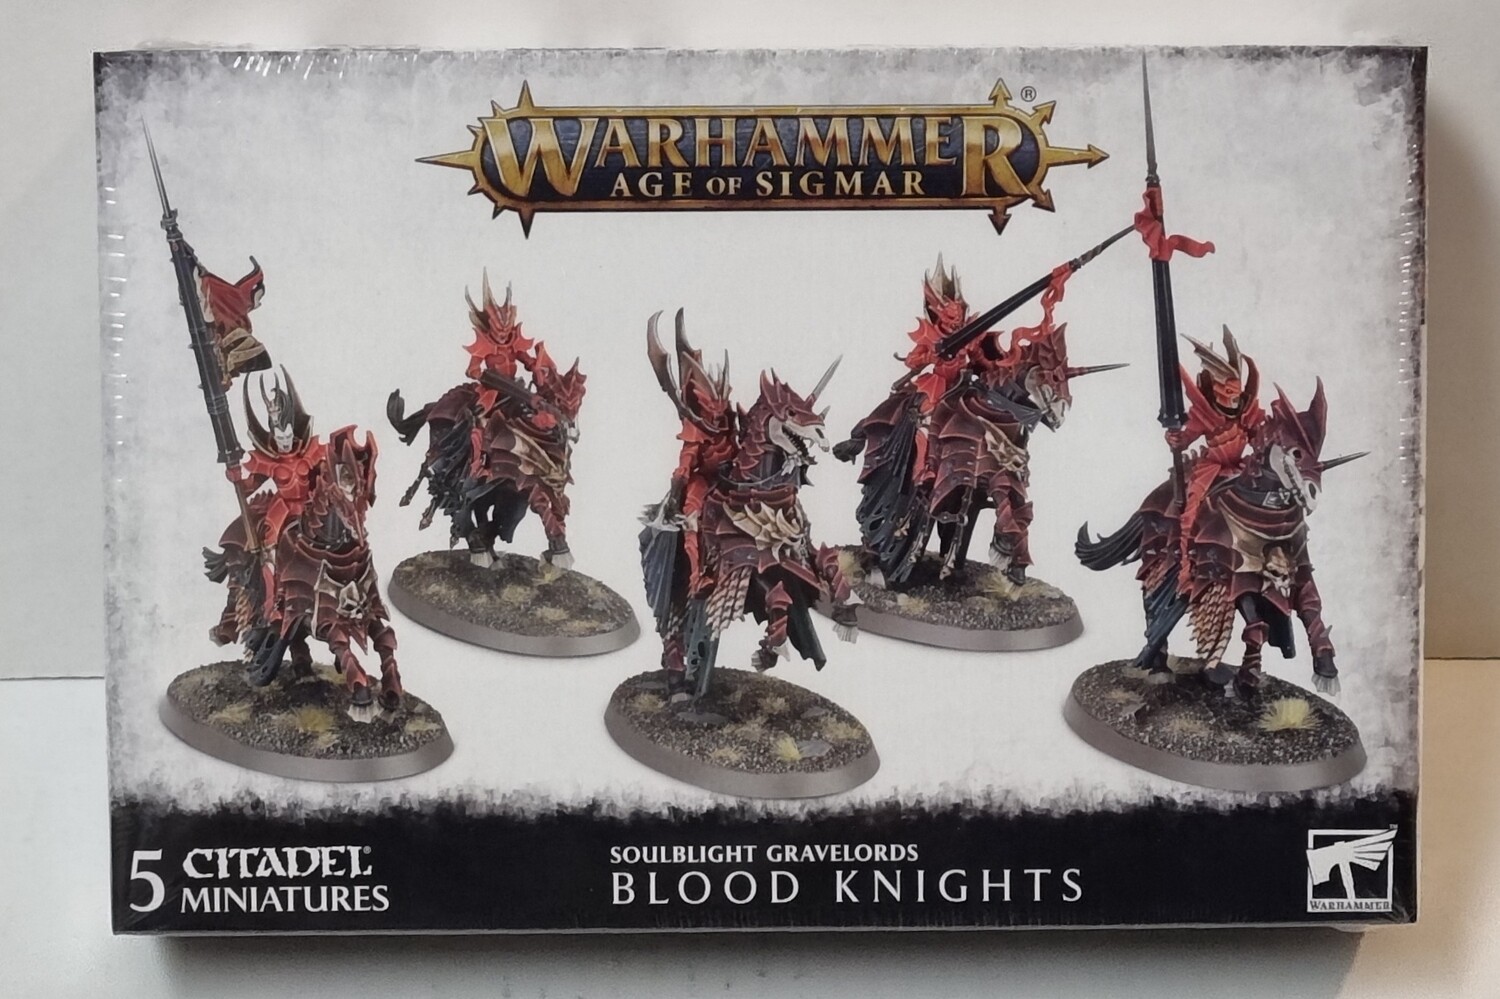 Warhammer Age of Sigmar, Soulblight Gravelords: Blood Knights